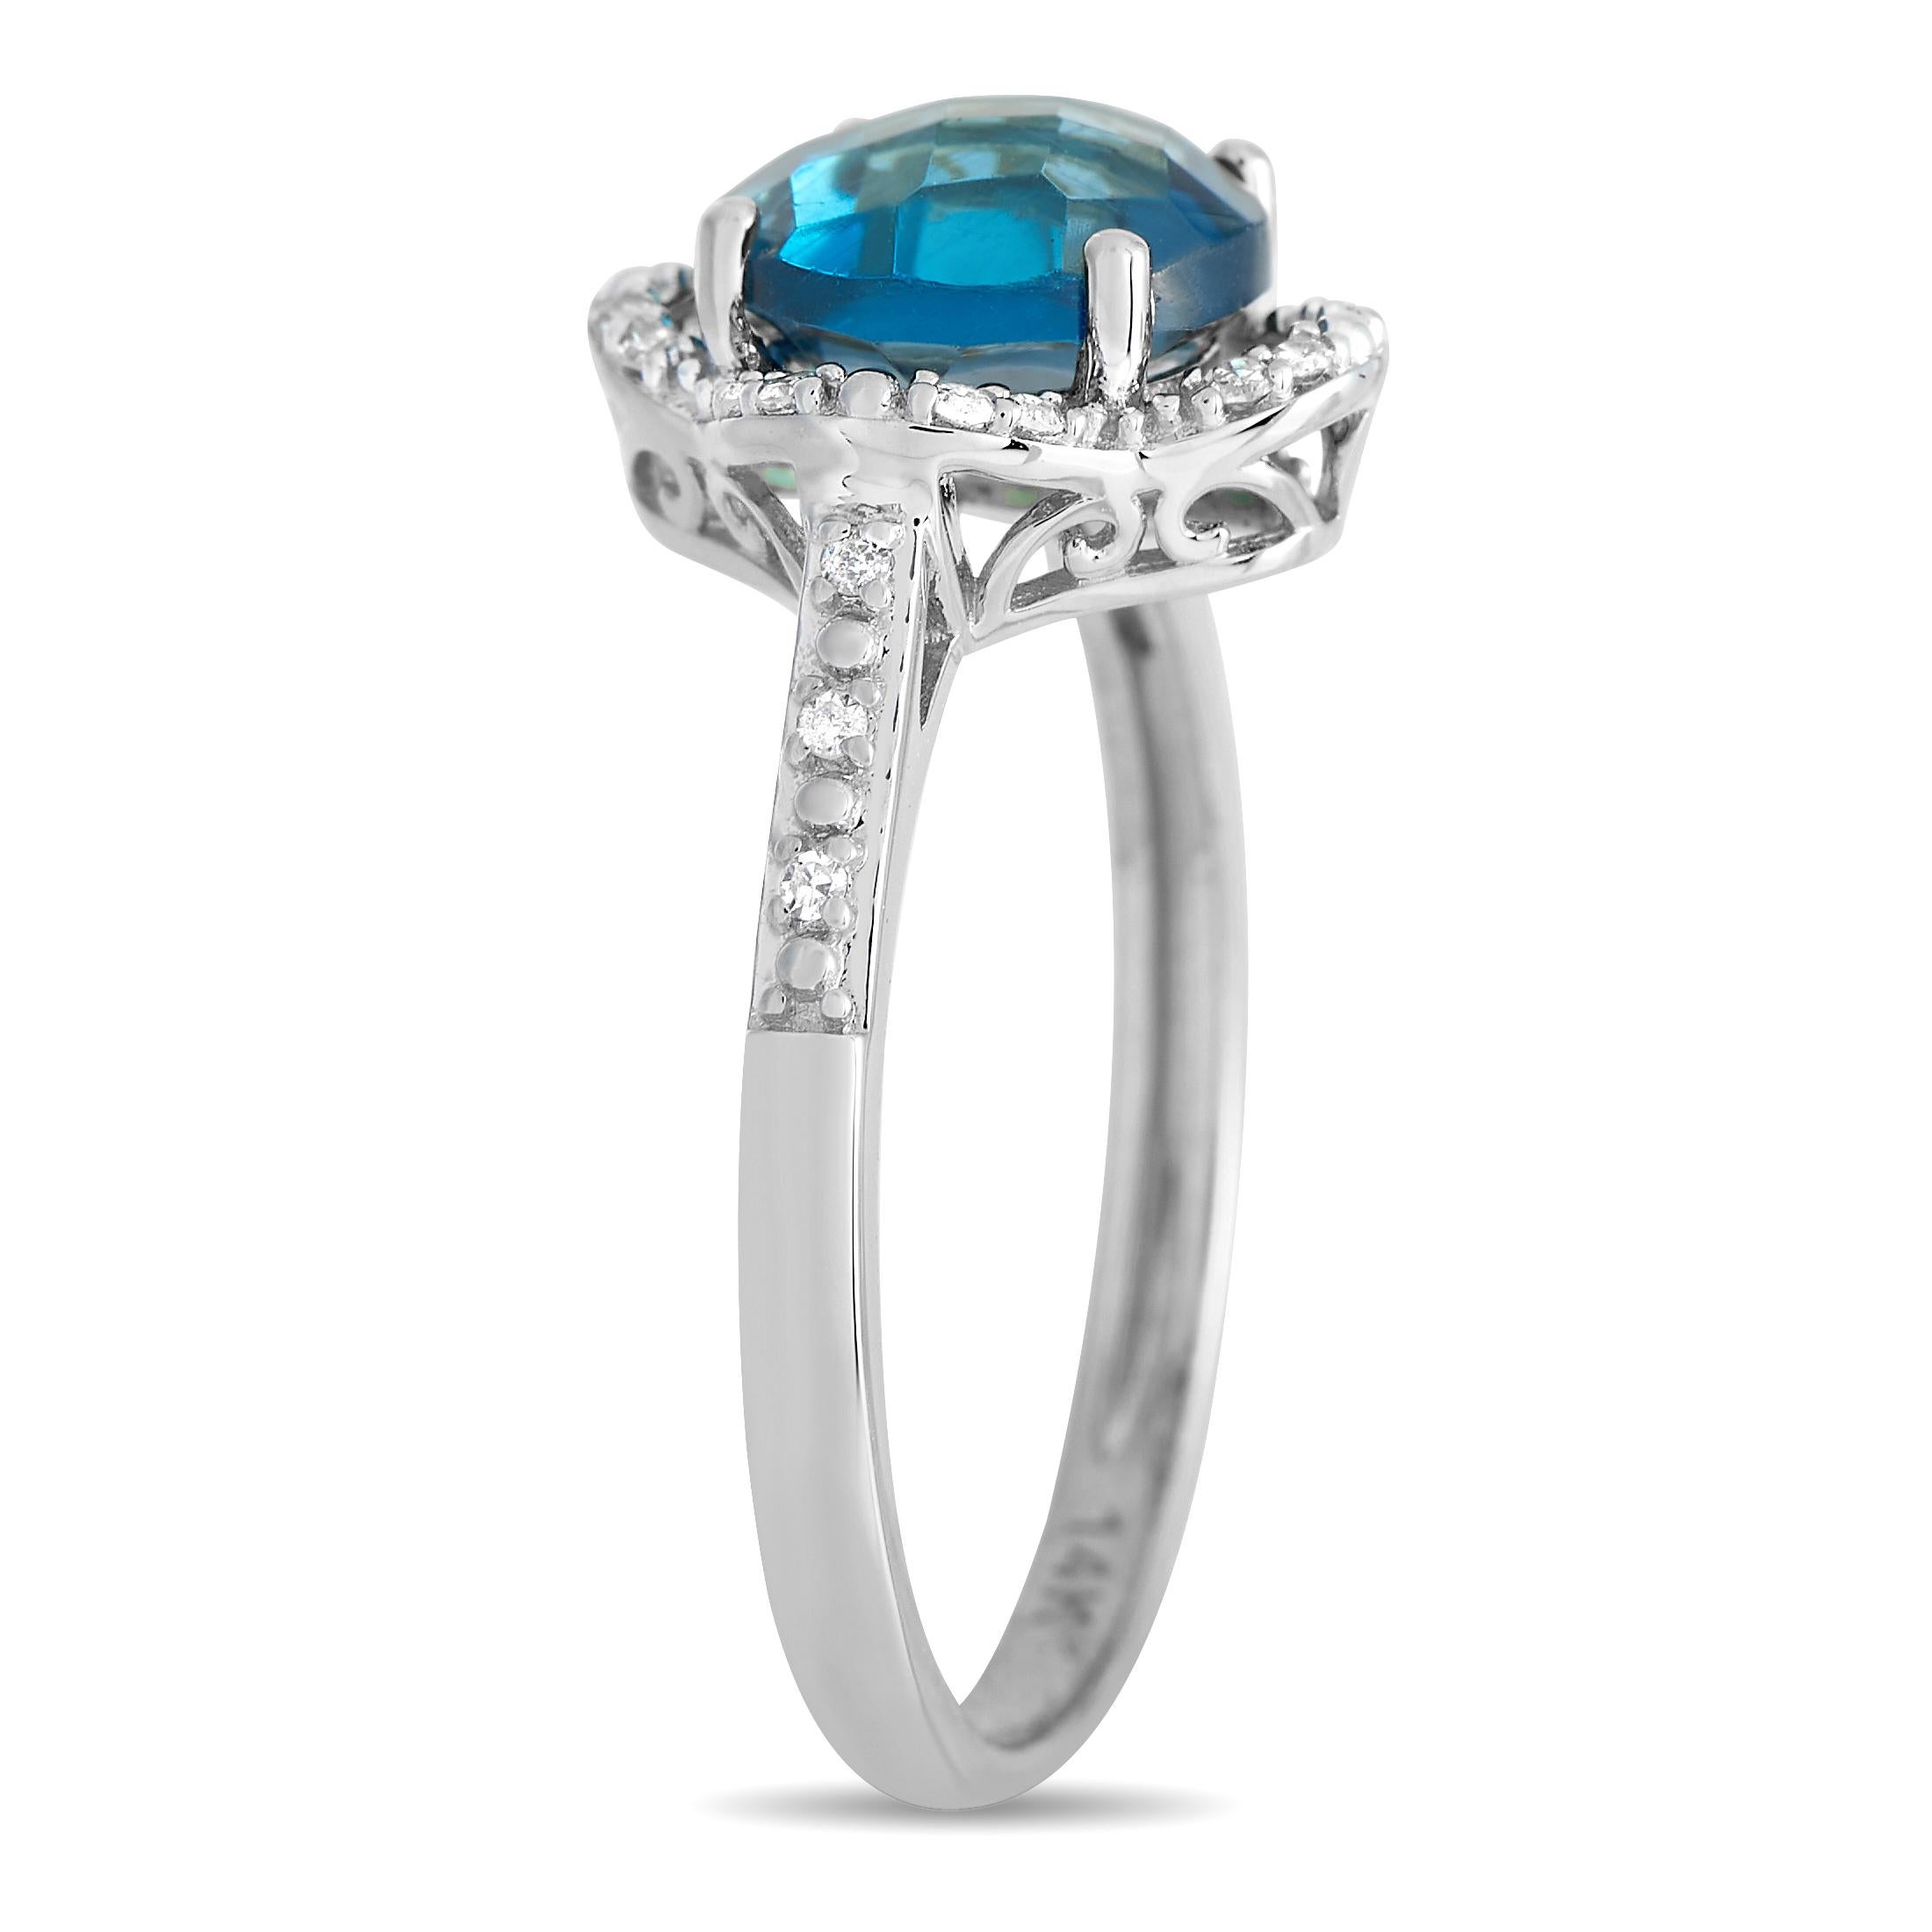 Wear this ring to add an instant positivity and color boost to your look. The ring has a slender band in 14K white gold, with rising shoulders decorated with diamonds. The centerpiece is a round topaz secured by four prongs and mounted on a